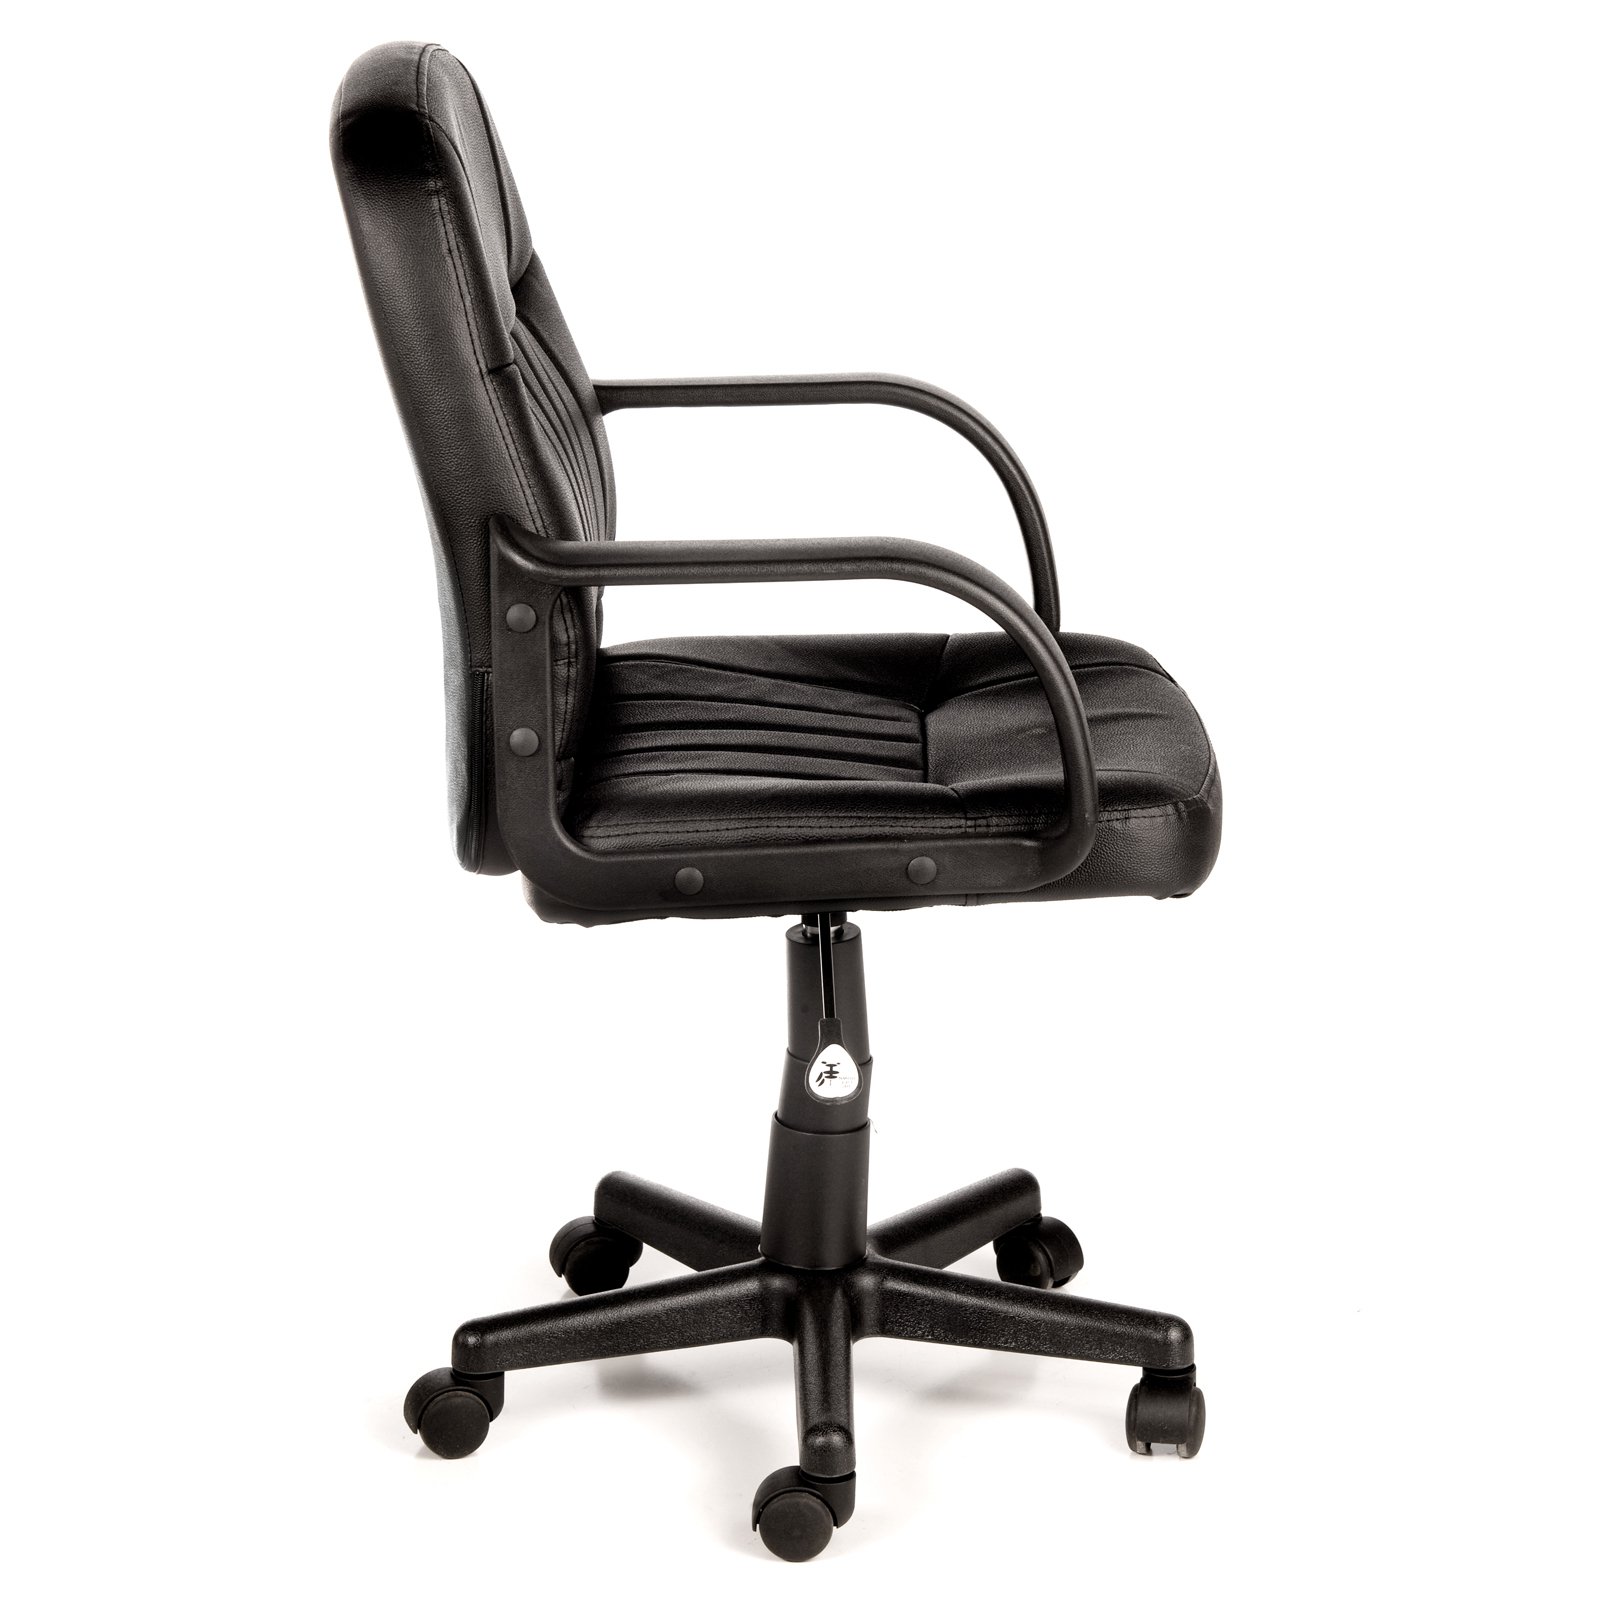 Comfort Products 60-5607M Mid-Back Leather Office Chair, Black - image 3 of 6